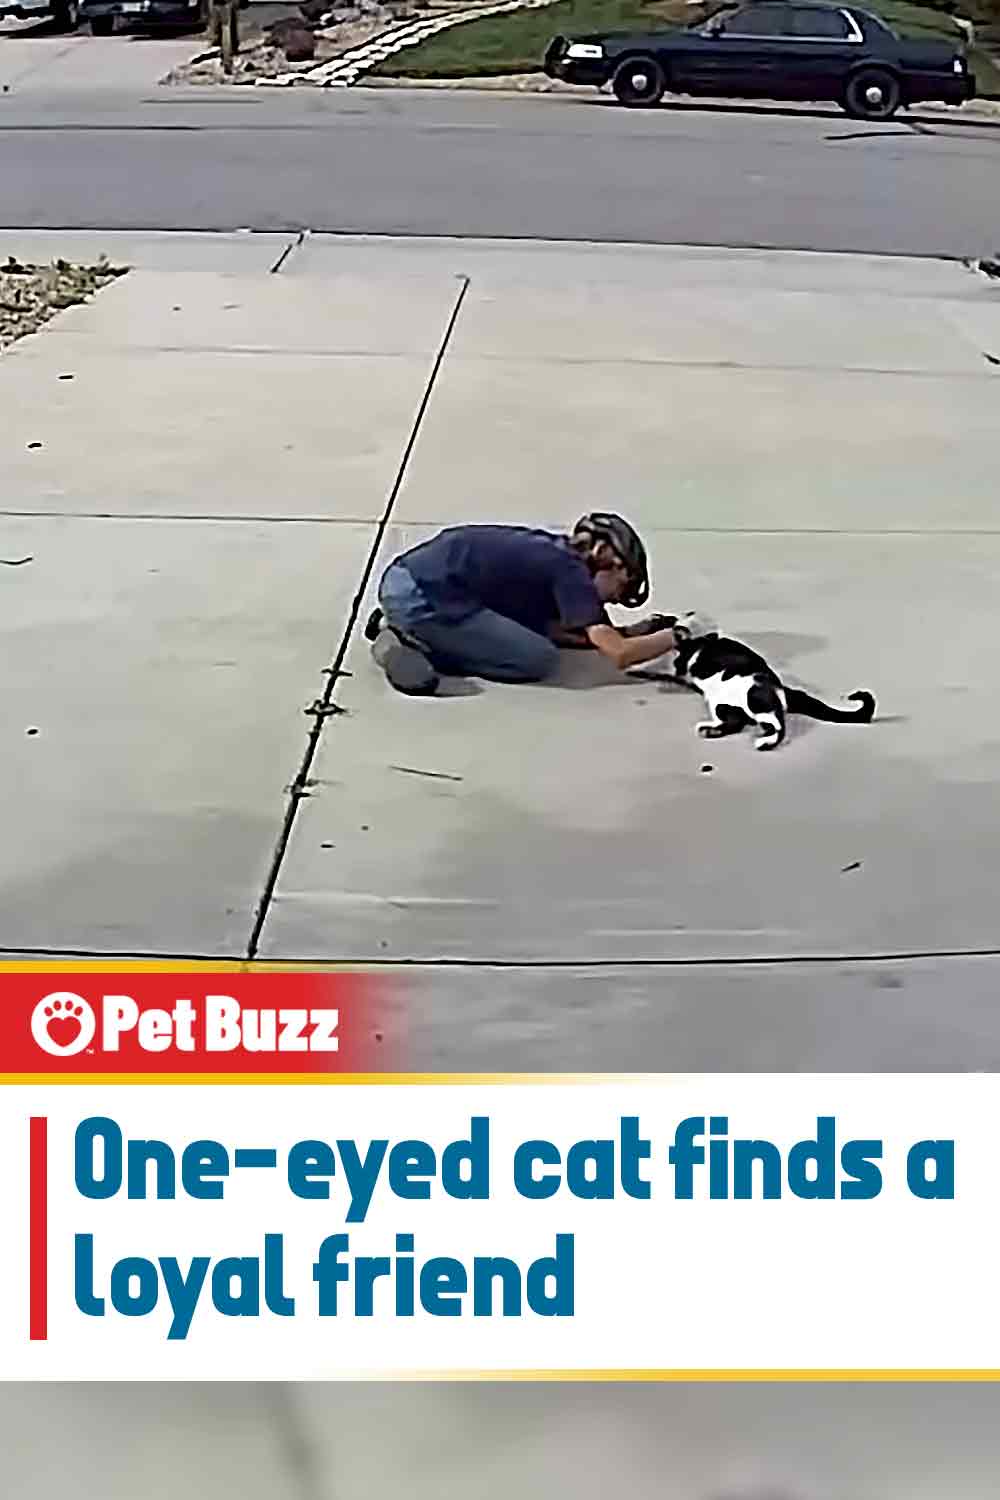 One-eyed cat finds a loyal friend